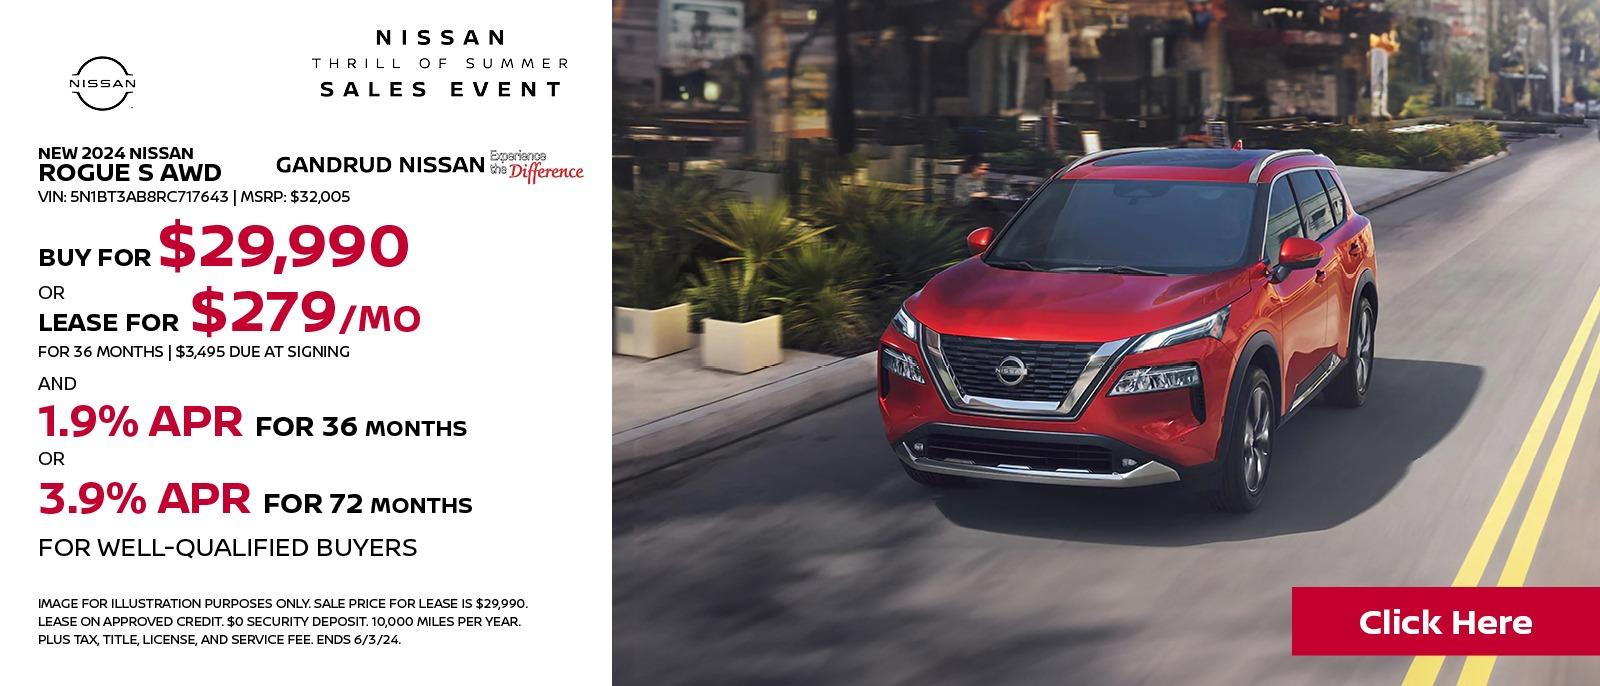 NEW 2024 NISSAN
ROGUE S AWD